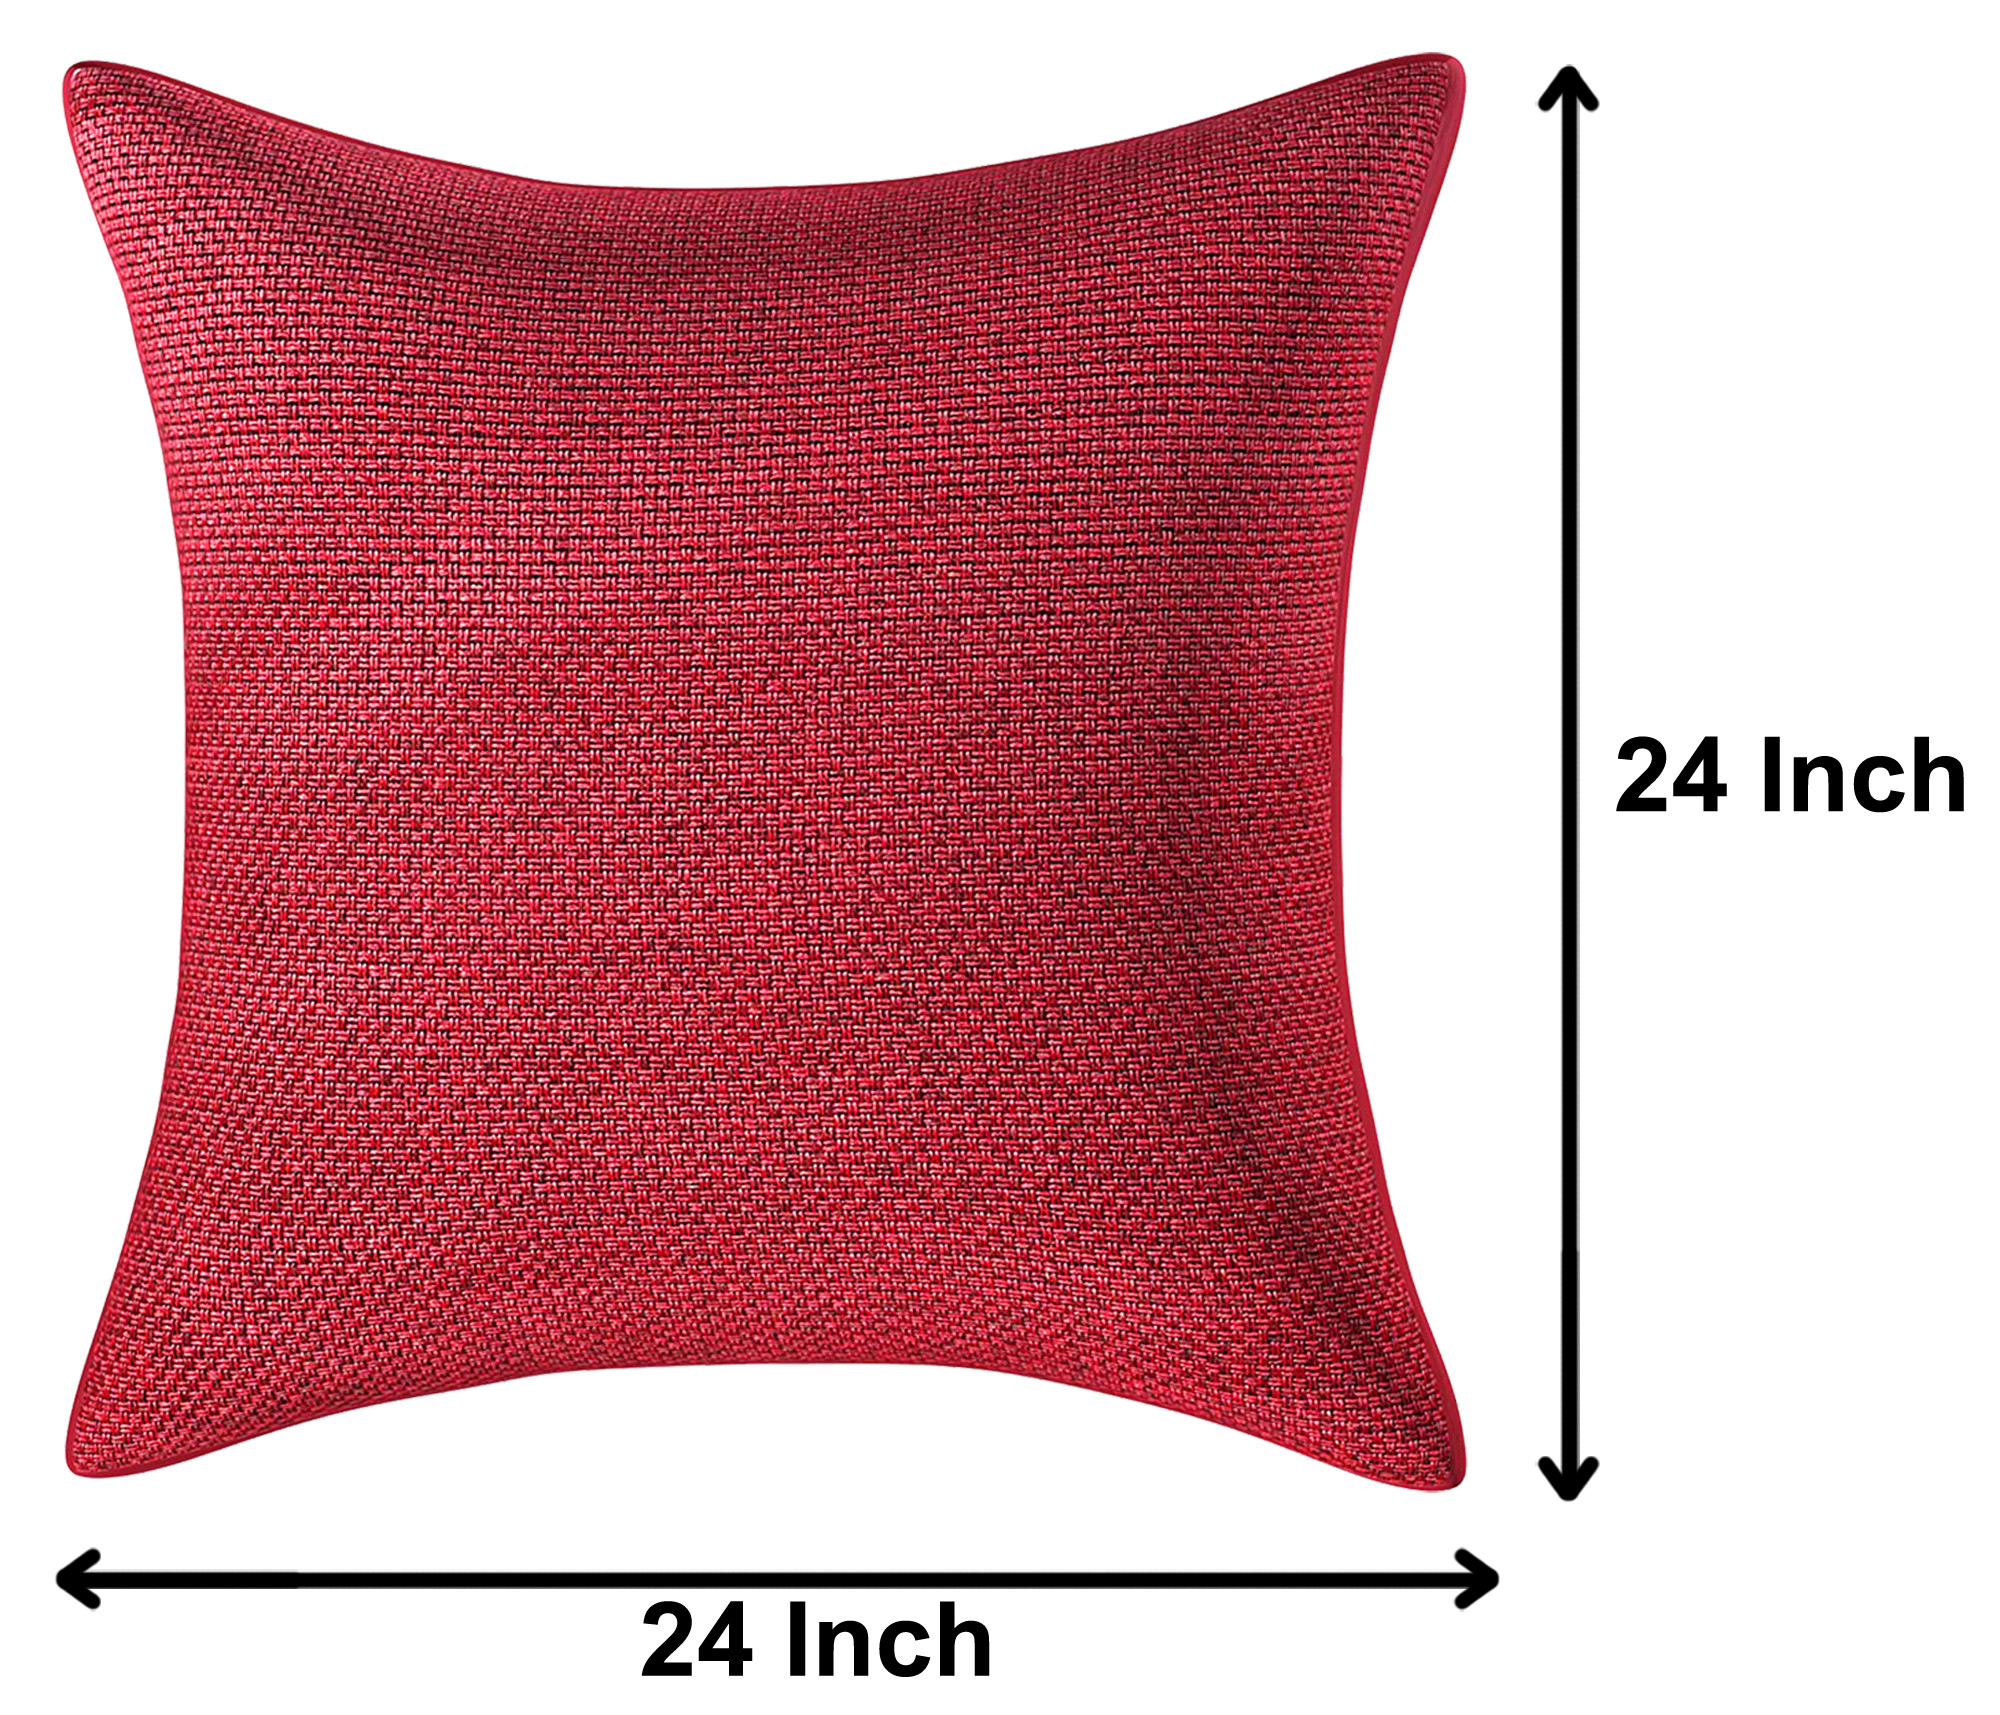 Kuber Industries Jute Blend Decorative Square Throw Pillow Cover Cushion Covers Pillowcase, Home Decor Decorations for Sofa Couch Bed Chair 24x24 Inch- (Maroon)